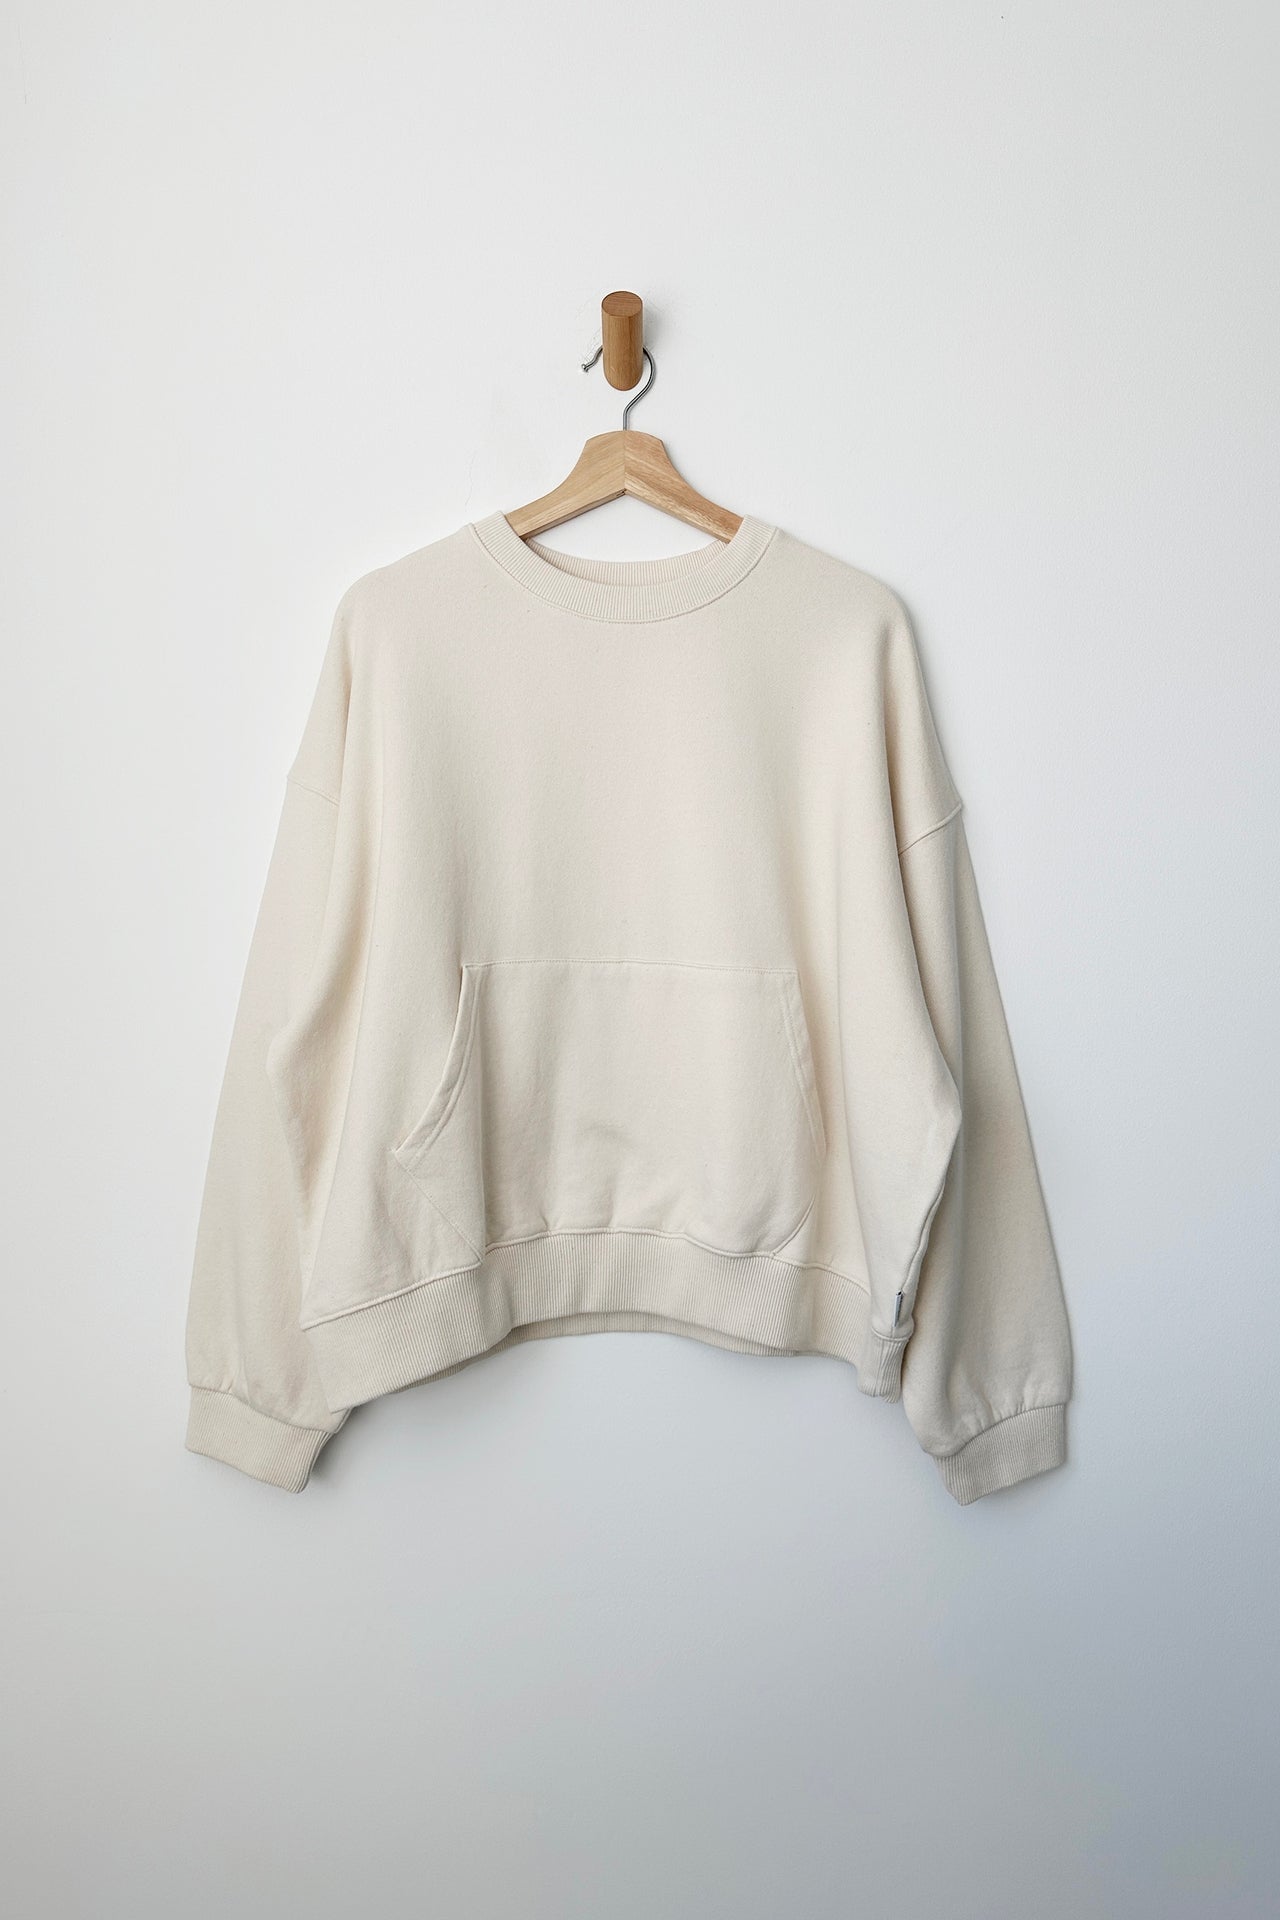 le bon shoppe french terry poche sweatshirt top in white made from 100% cotton